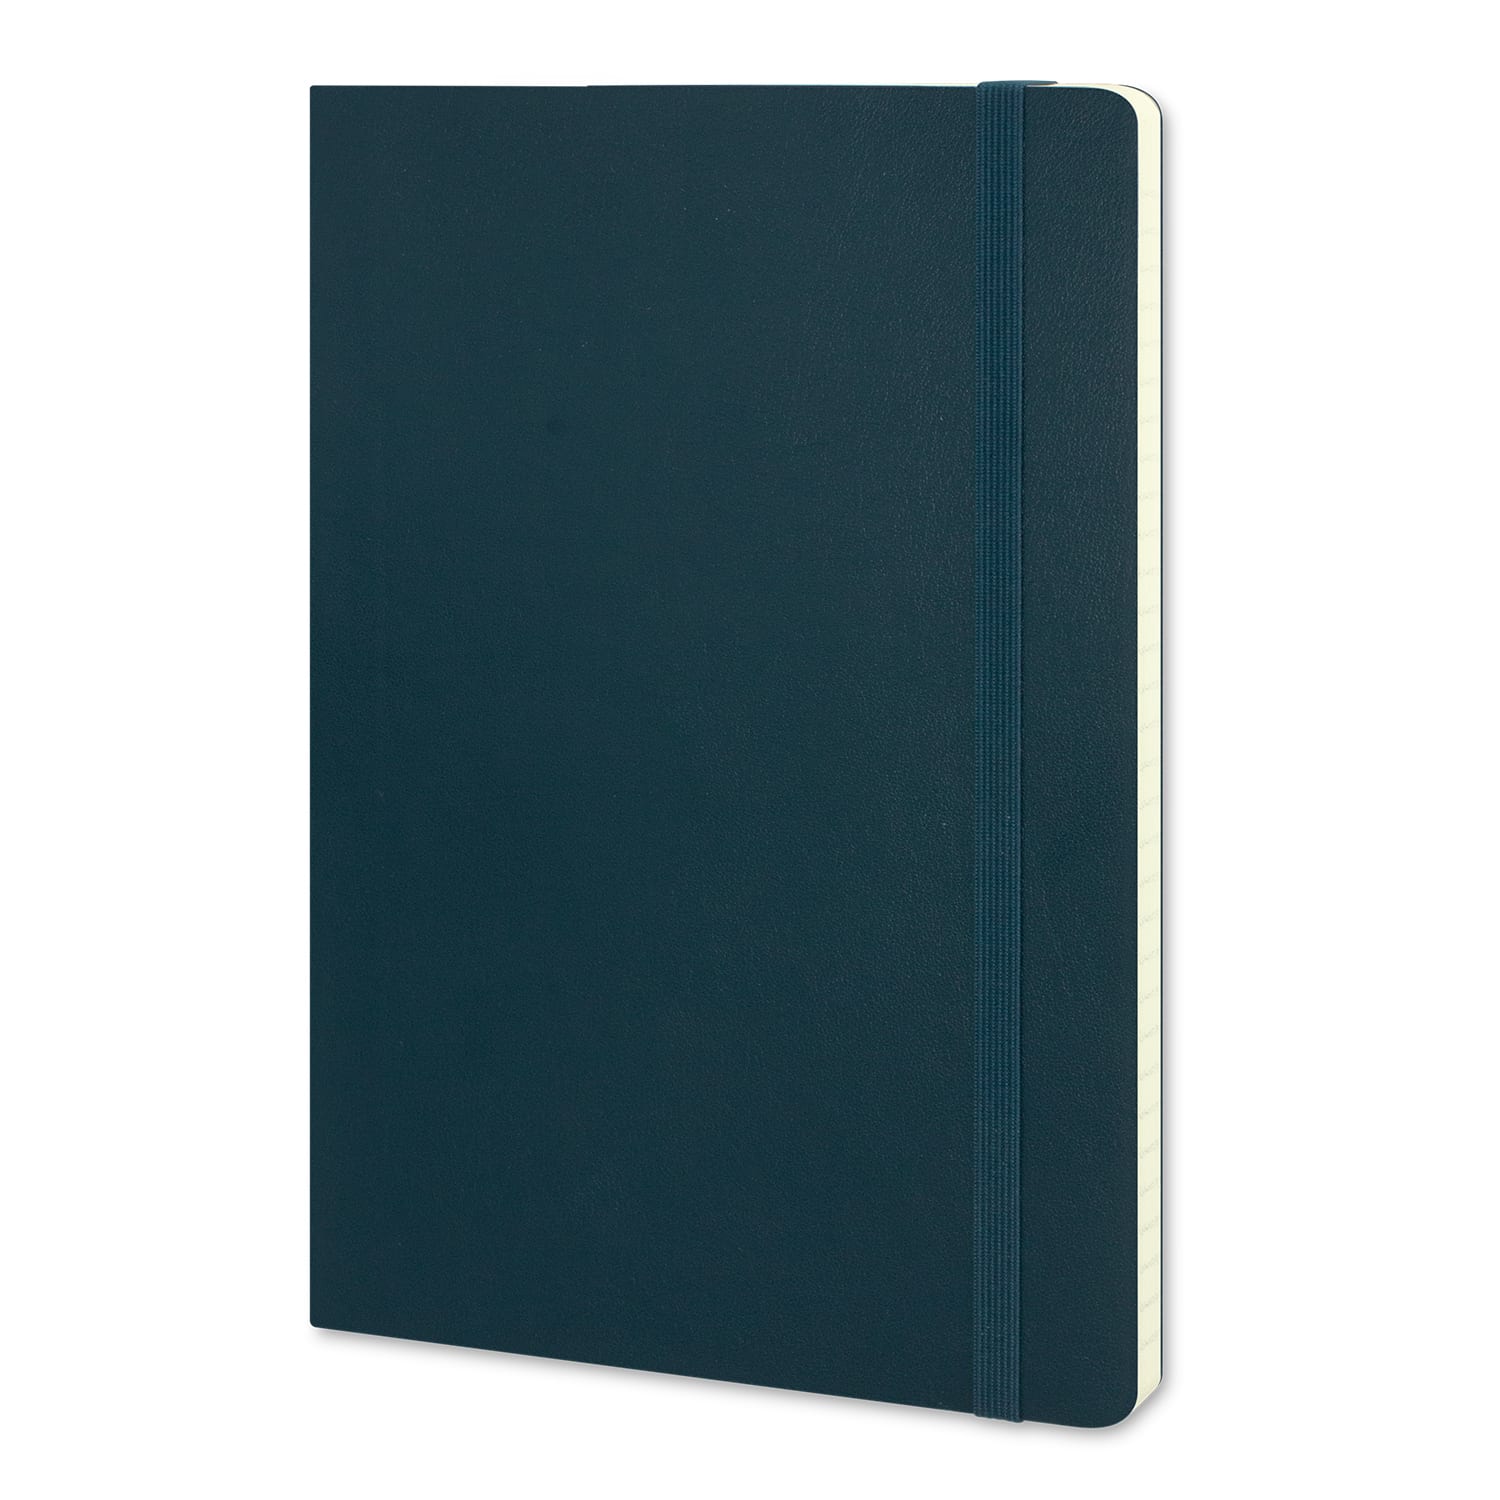 LUXE GIFT RANGE Moleskine Classic Soft Cover Notebook – Large classic